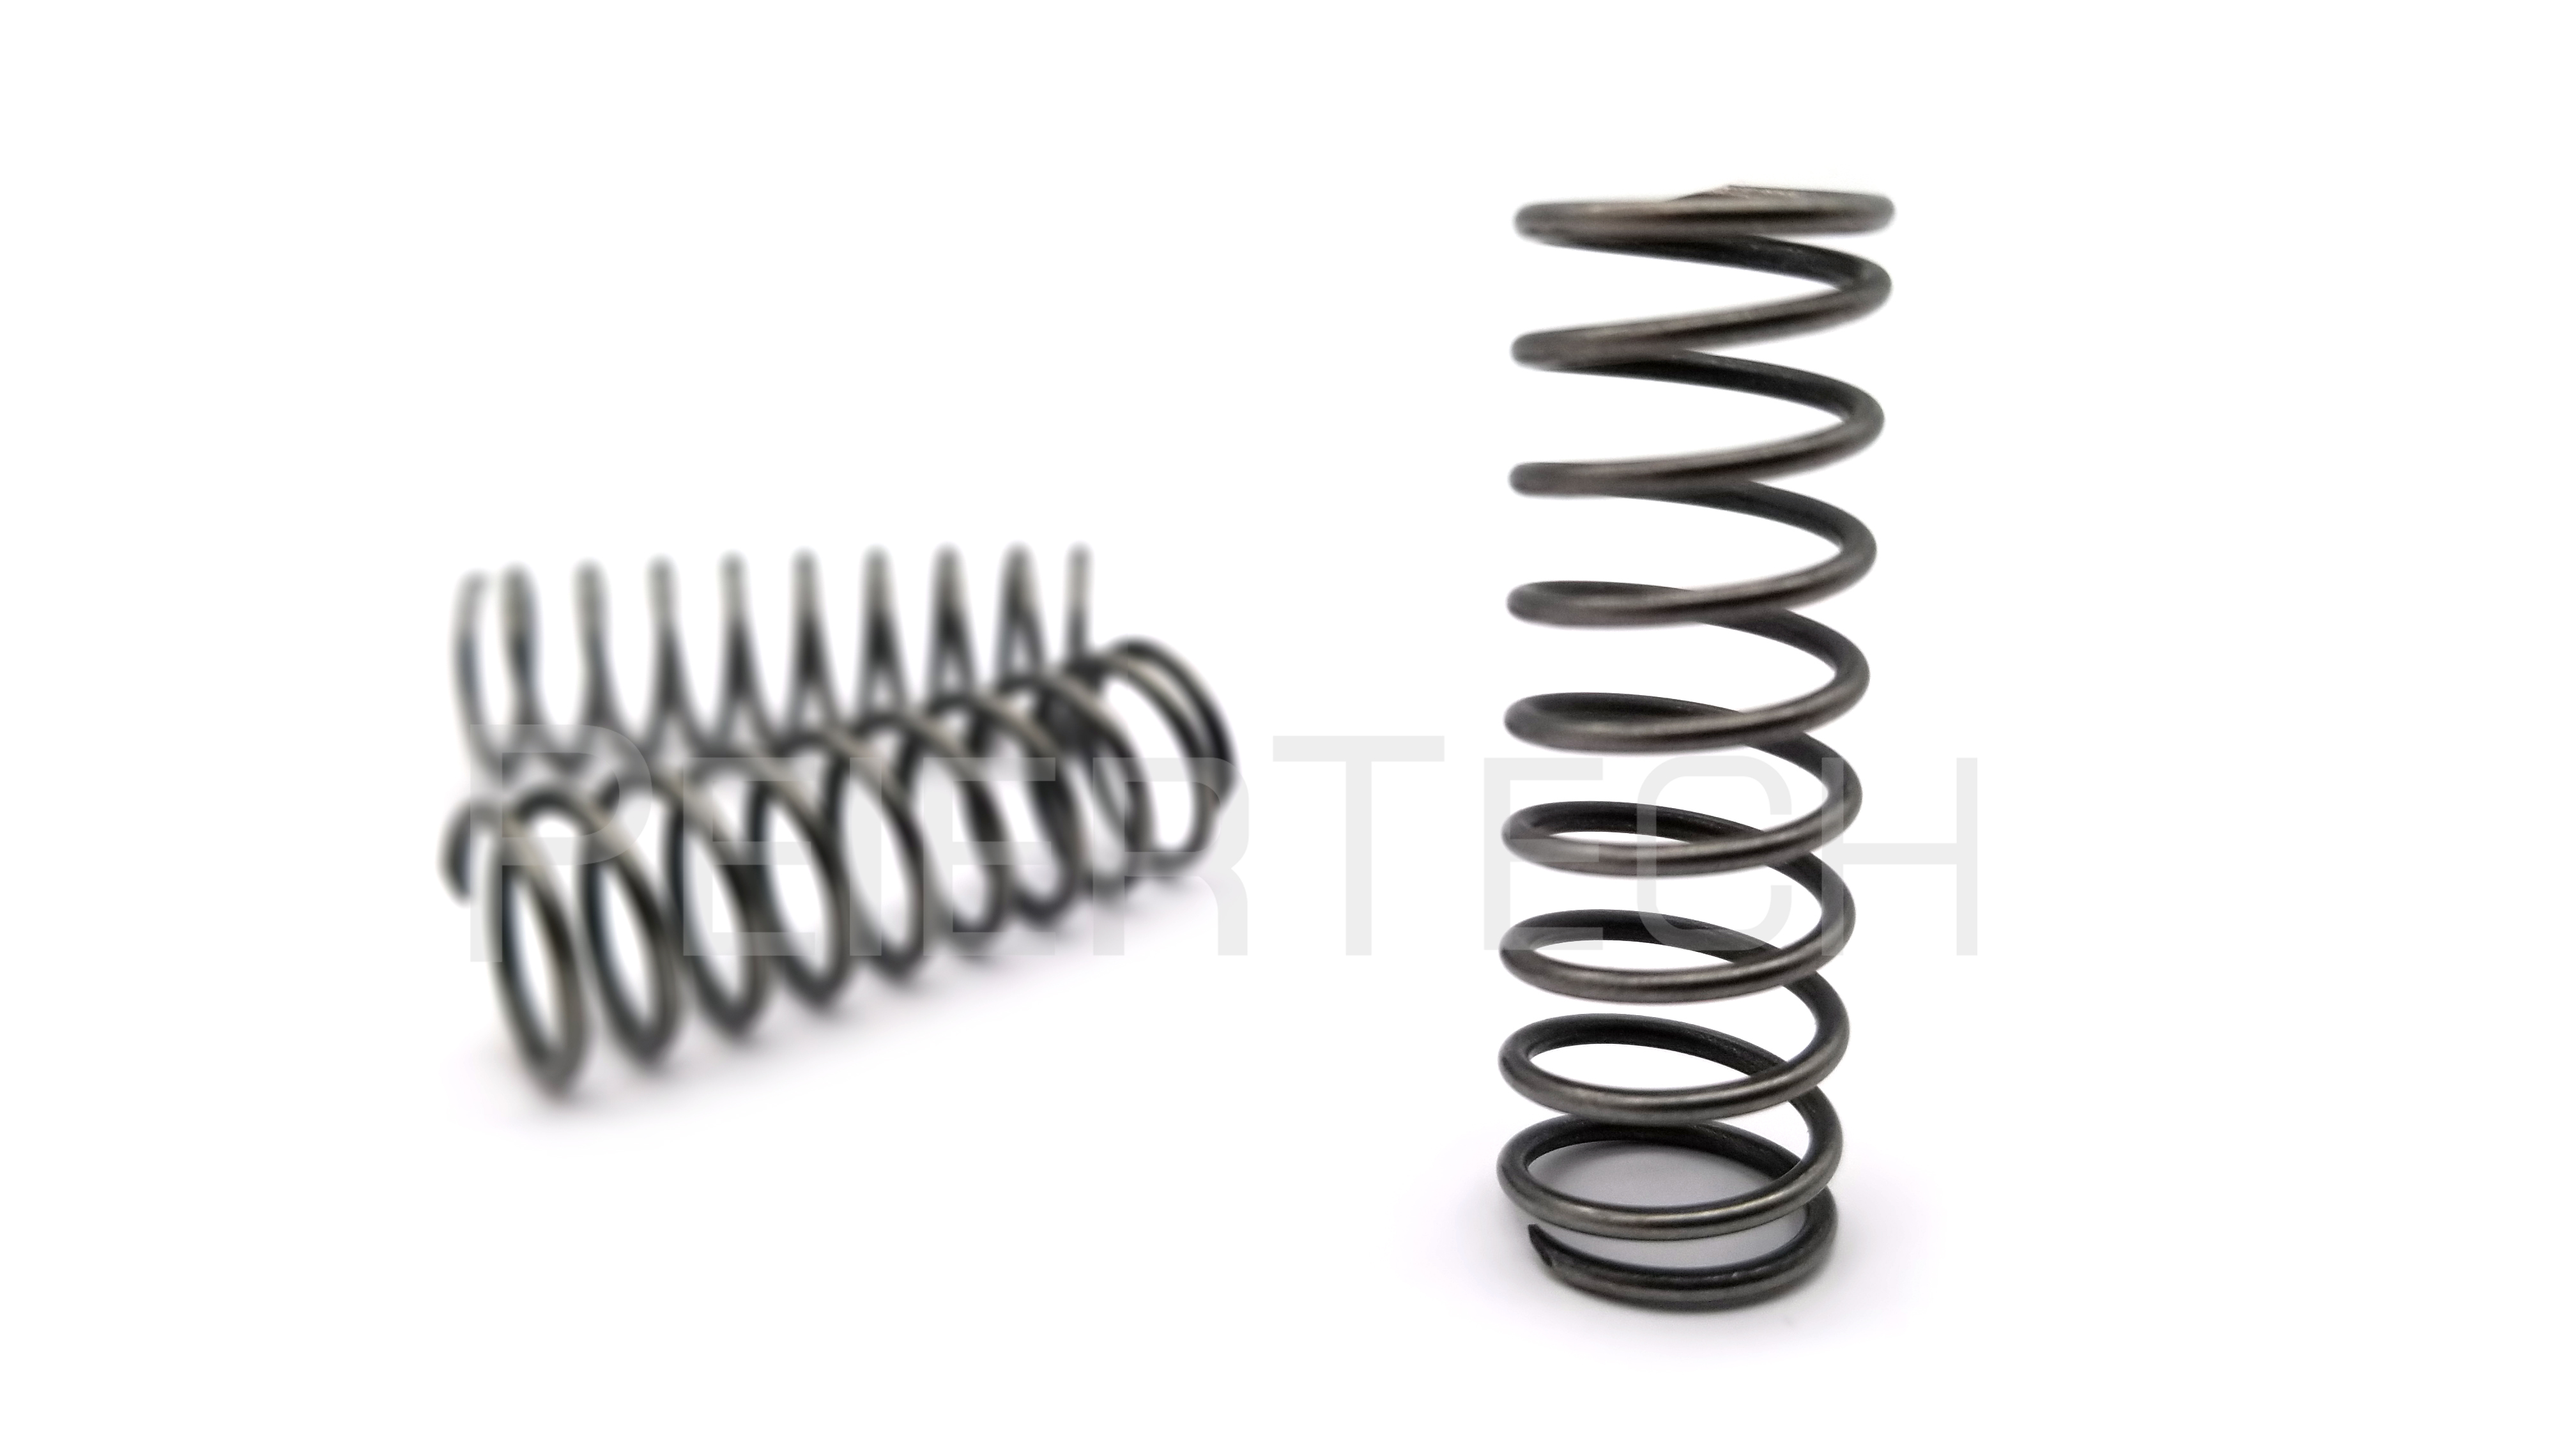 Nitinol Component Nitinol Spring Proven High-Volume Performance, helps Customers reduce time to market We Do It All With Nitinol